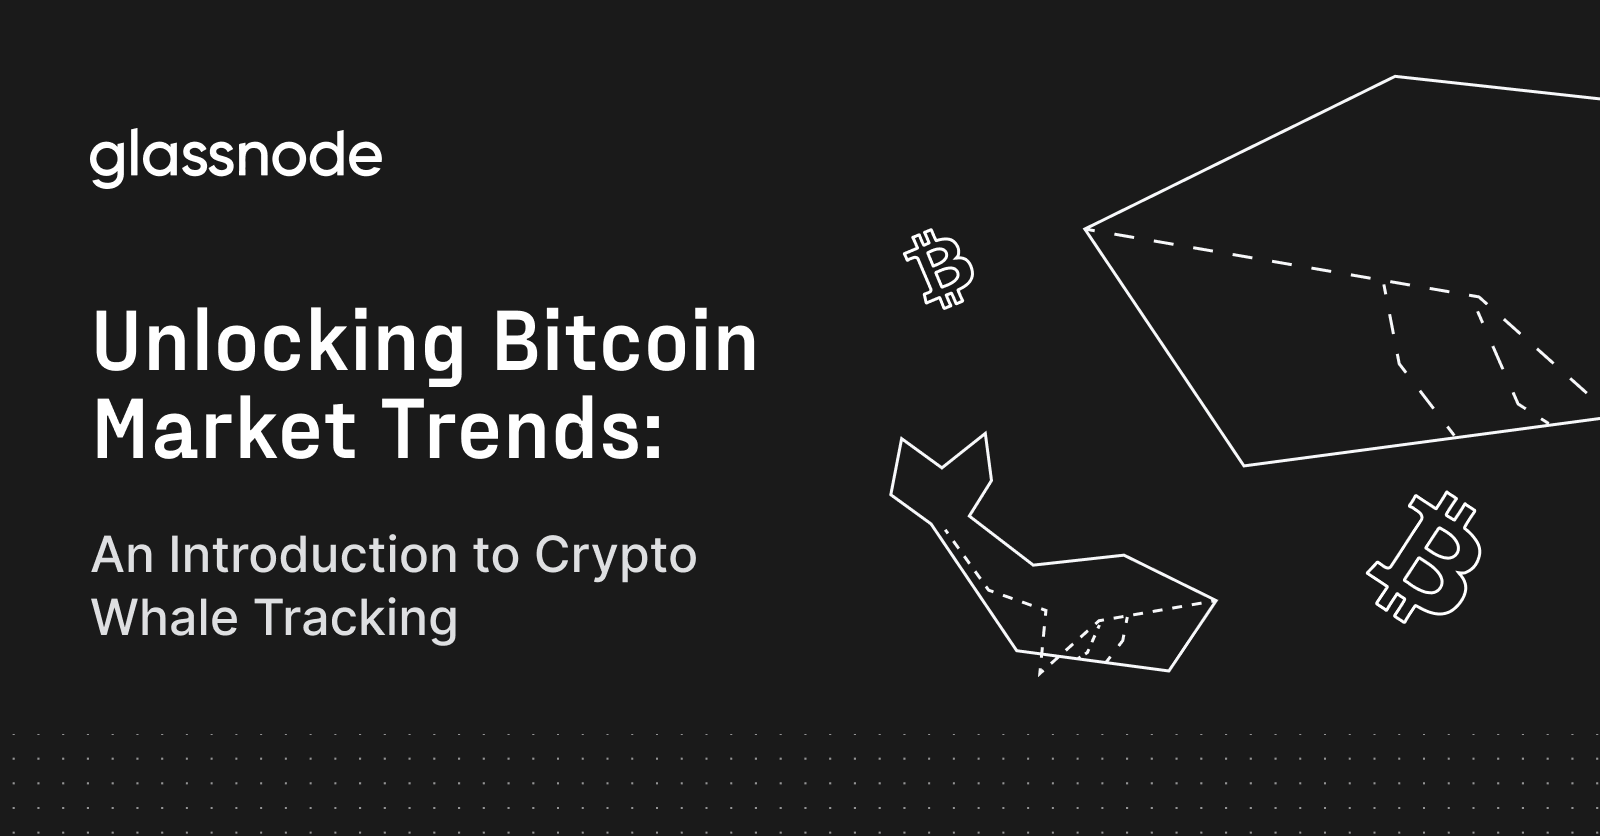 Unlocking Bitcoin Market Trends: An Introduction to Crypto Whale Tracking